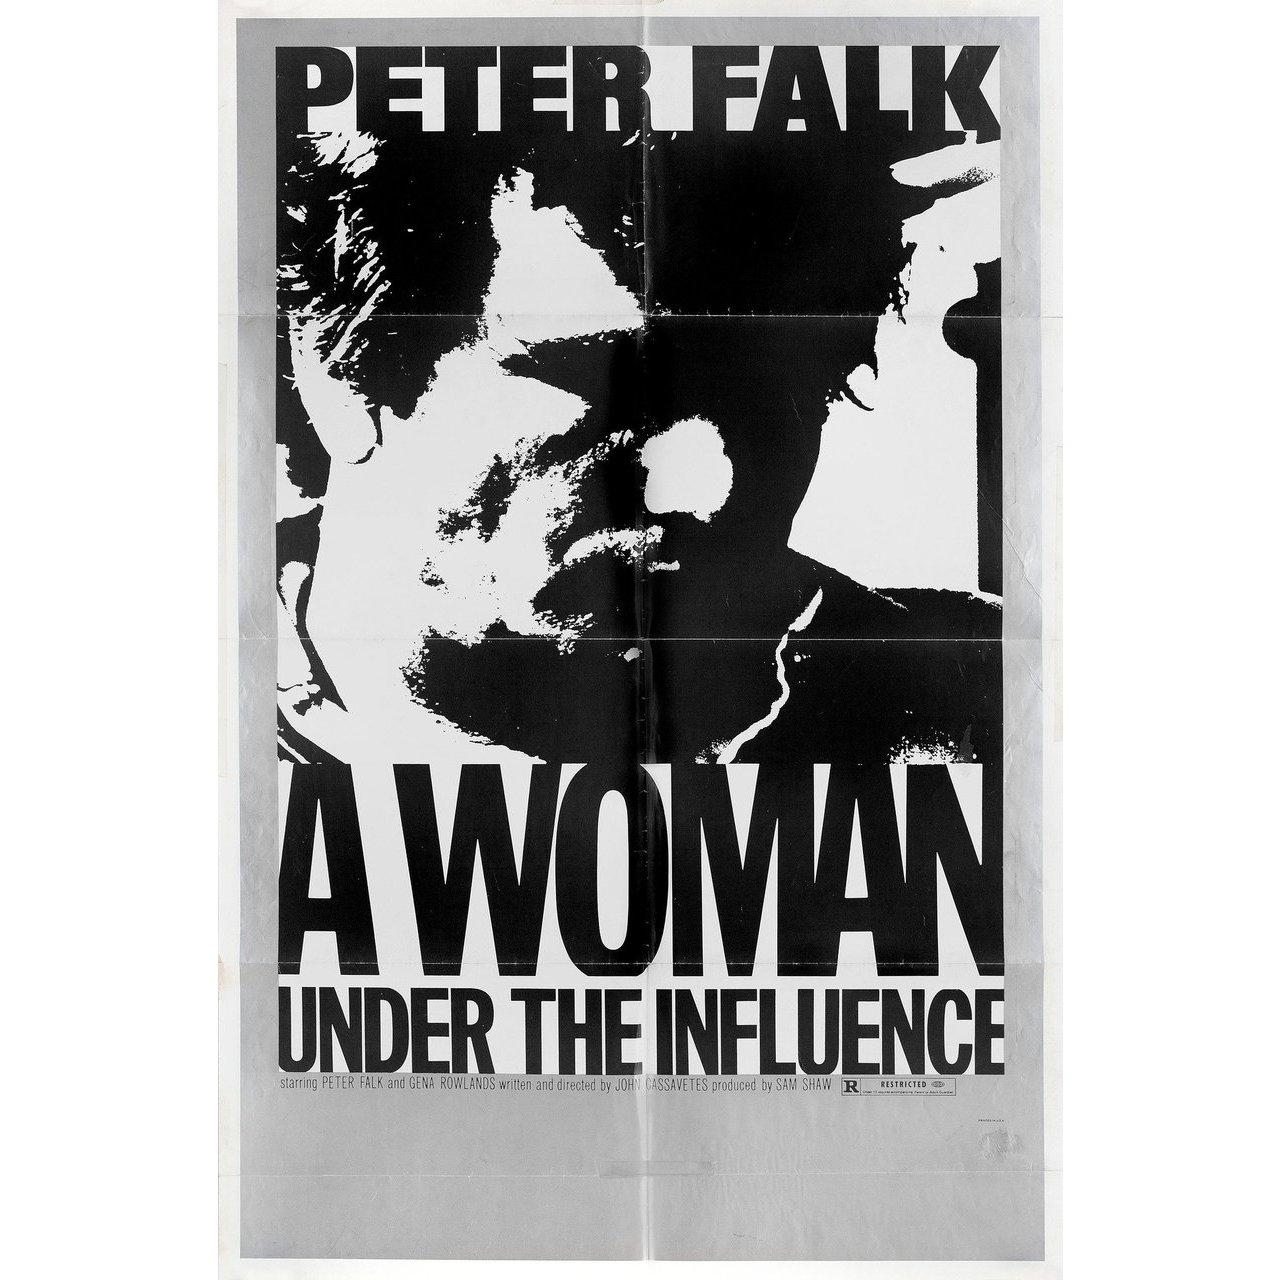 American A Woman Under the Influence 1974 U.S. One Sheet Film Poster